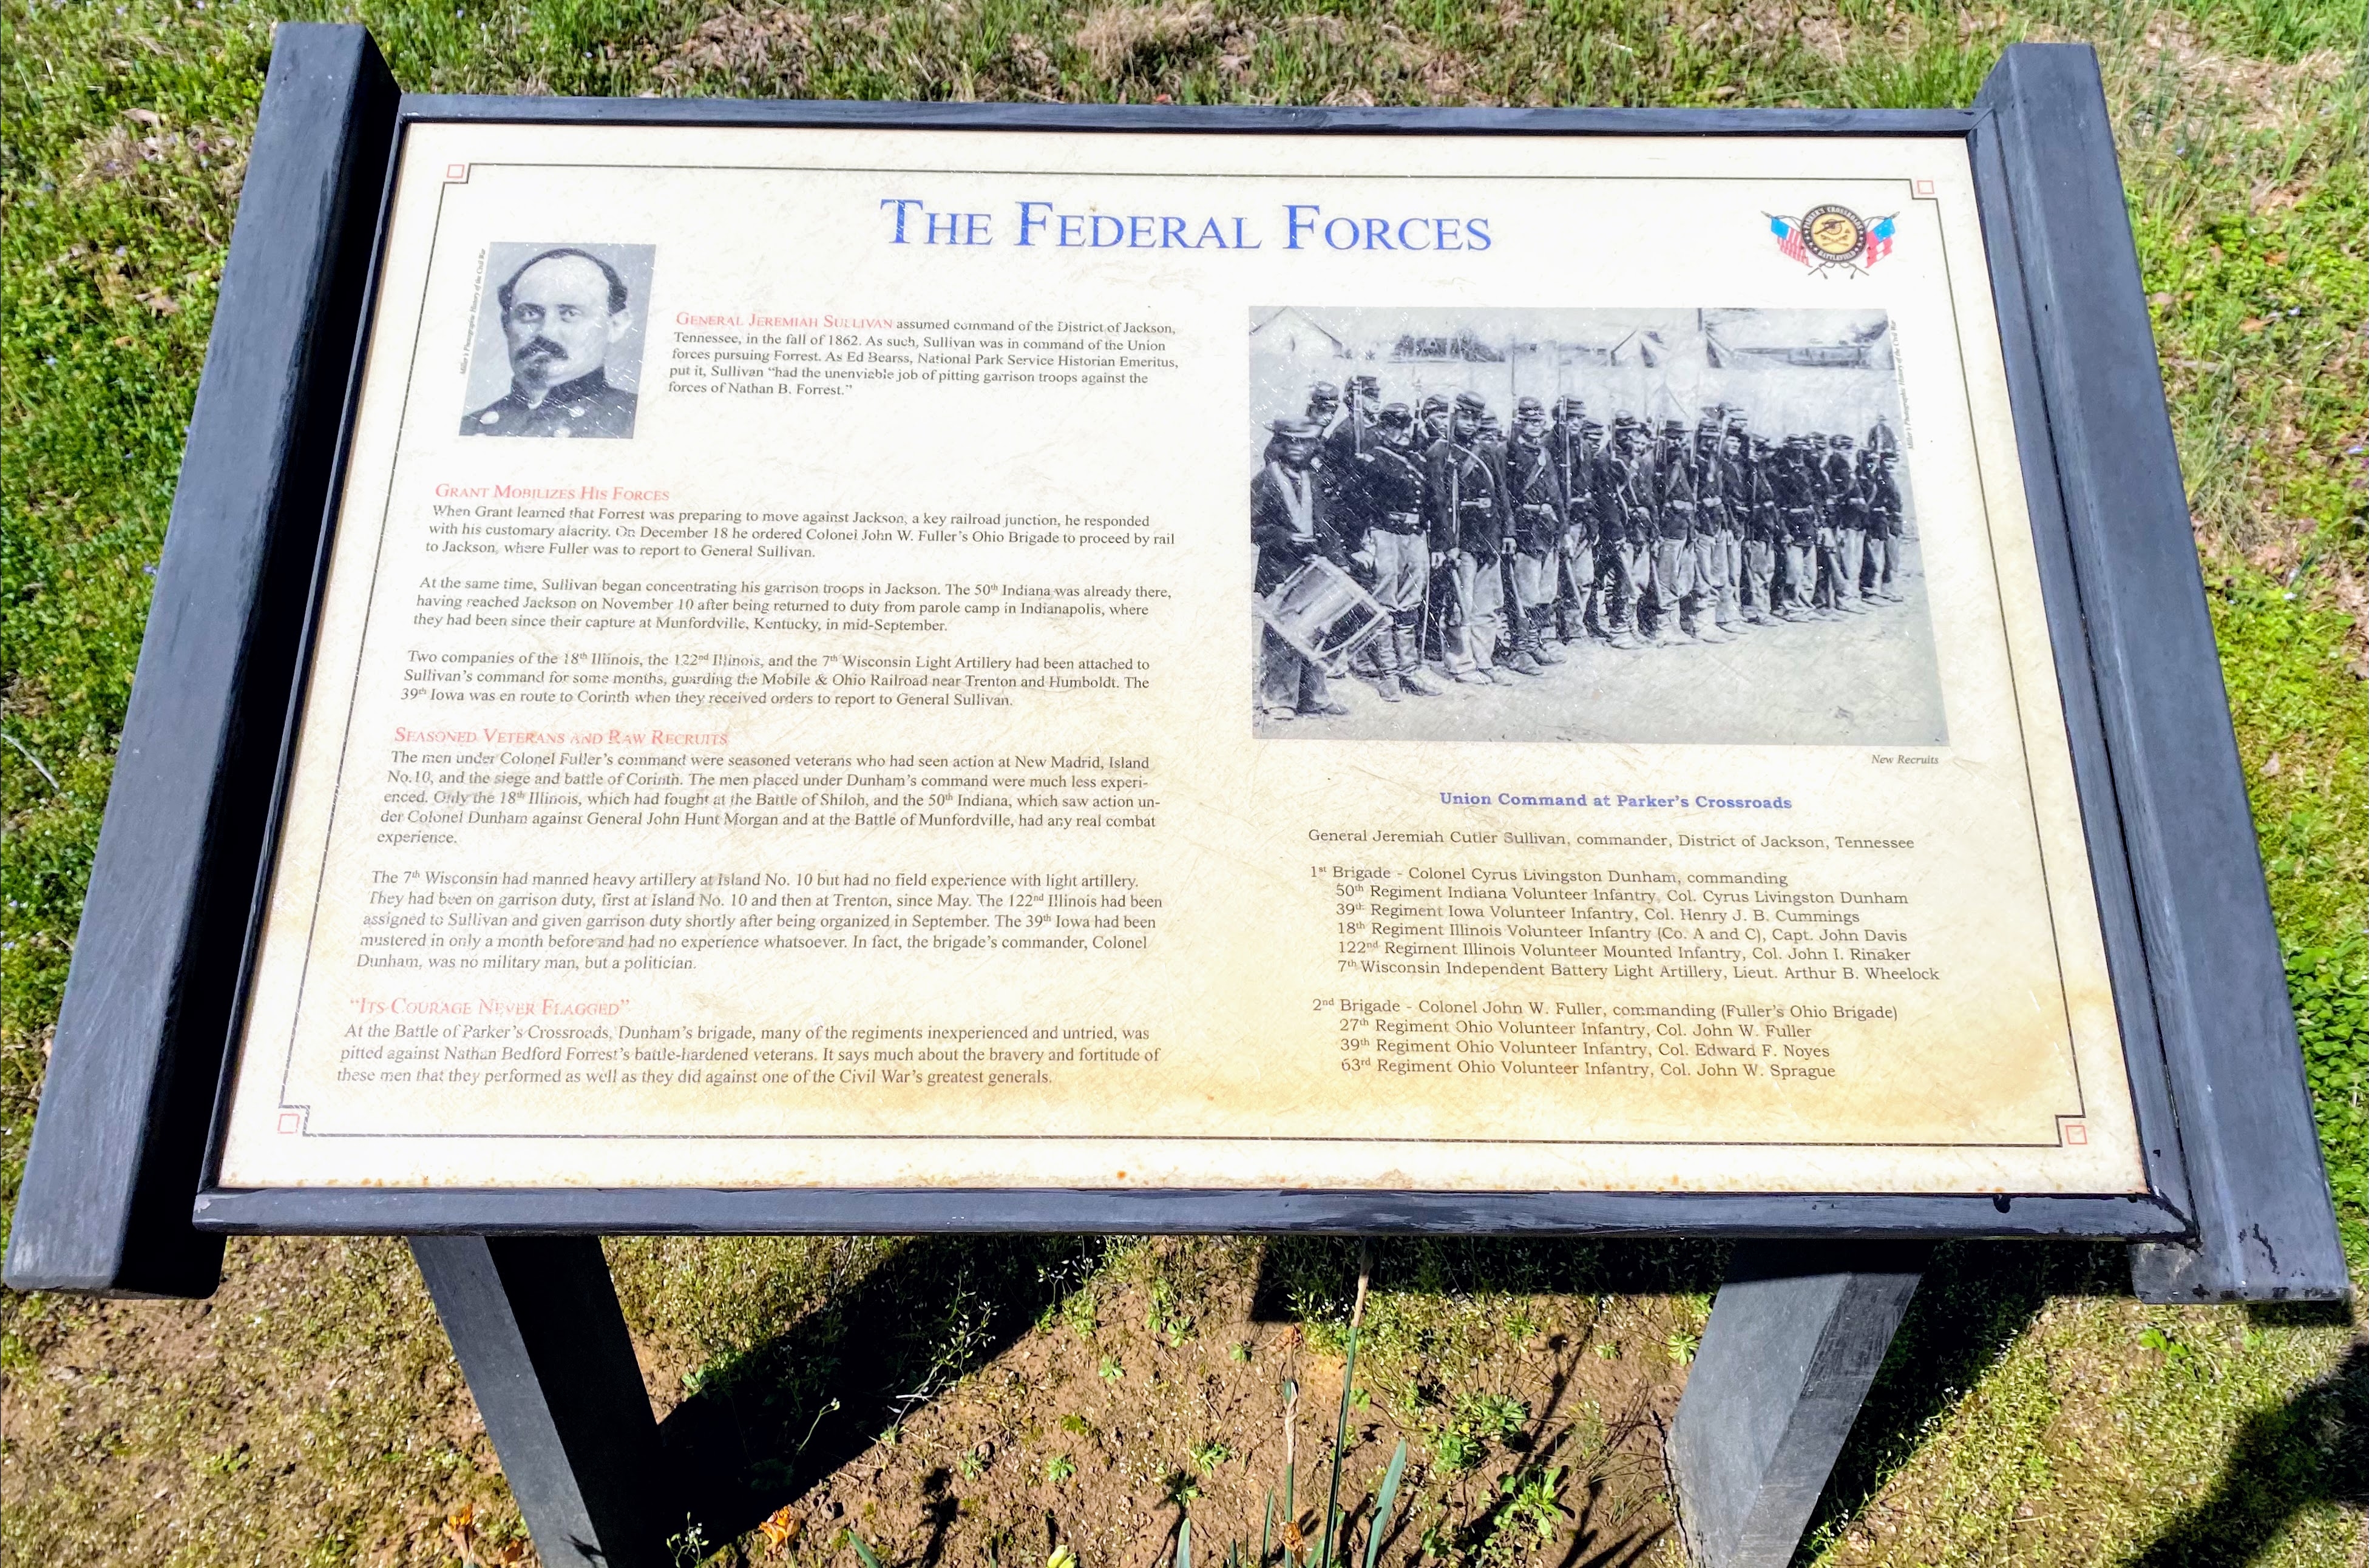 The Federal Forces Marker